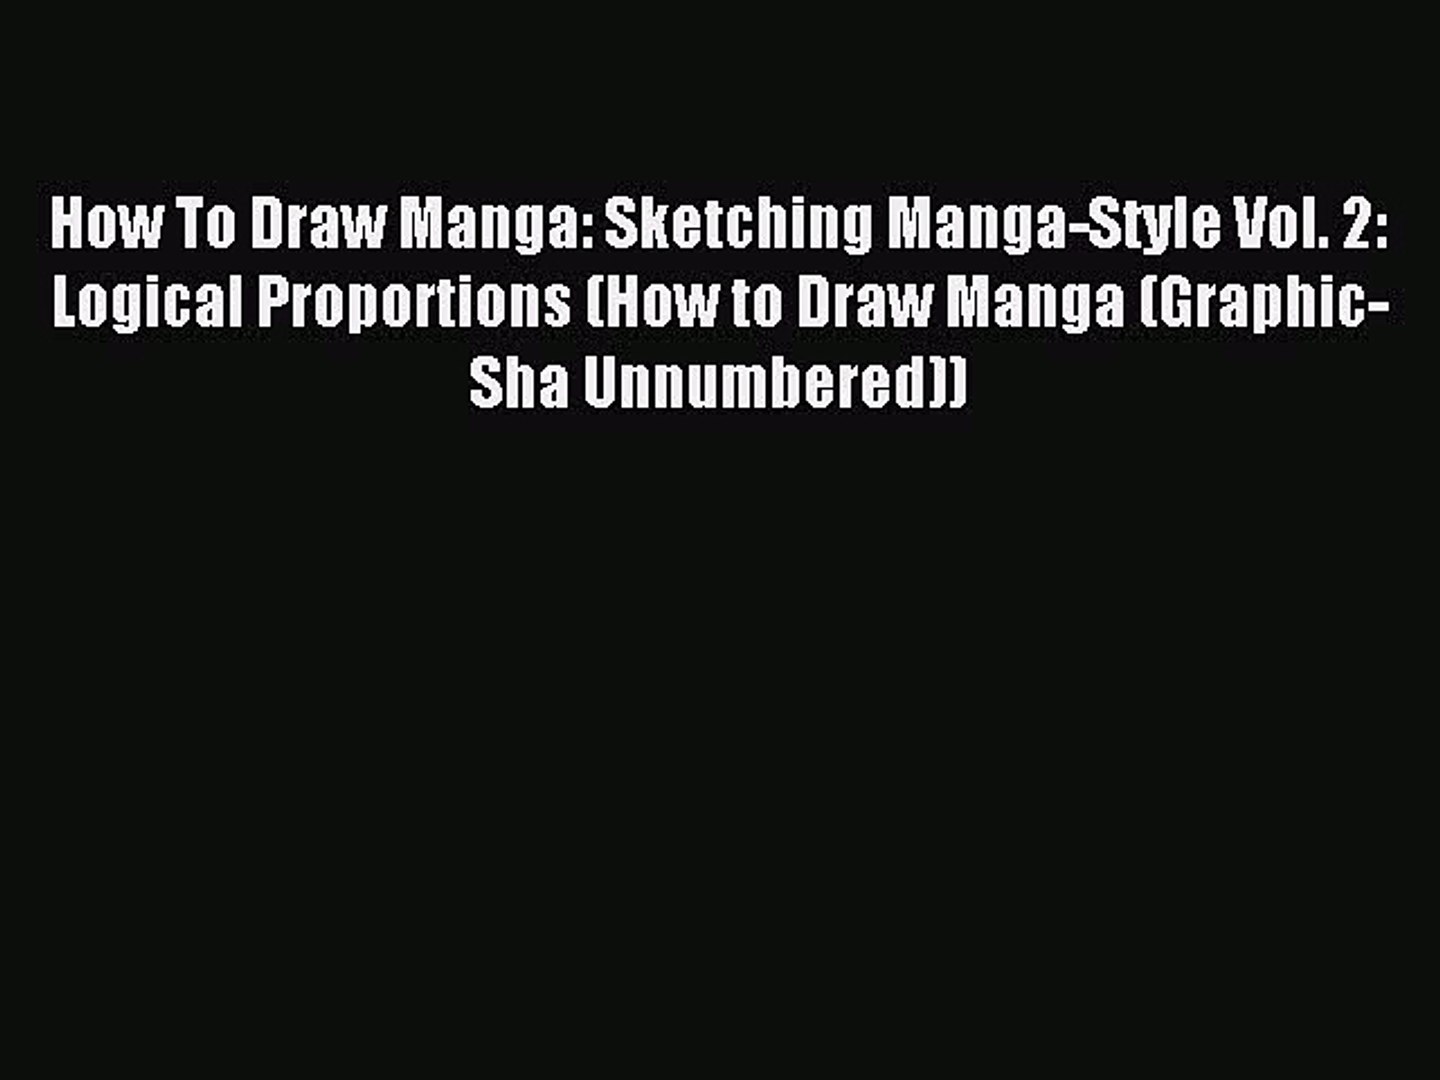 Read How To Draw Manga: Sketching Manga-Style Vol. 2: Logical Proportions (How to Draw Manga